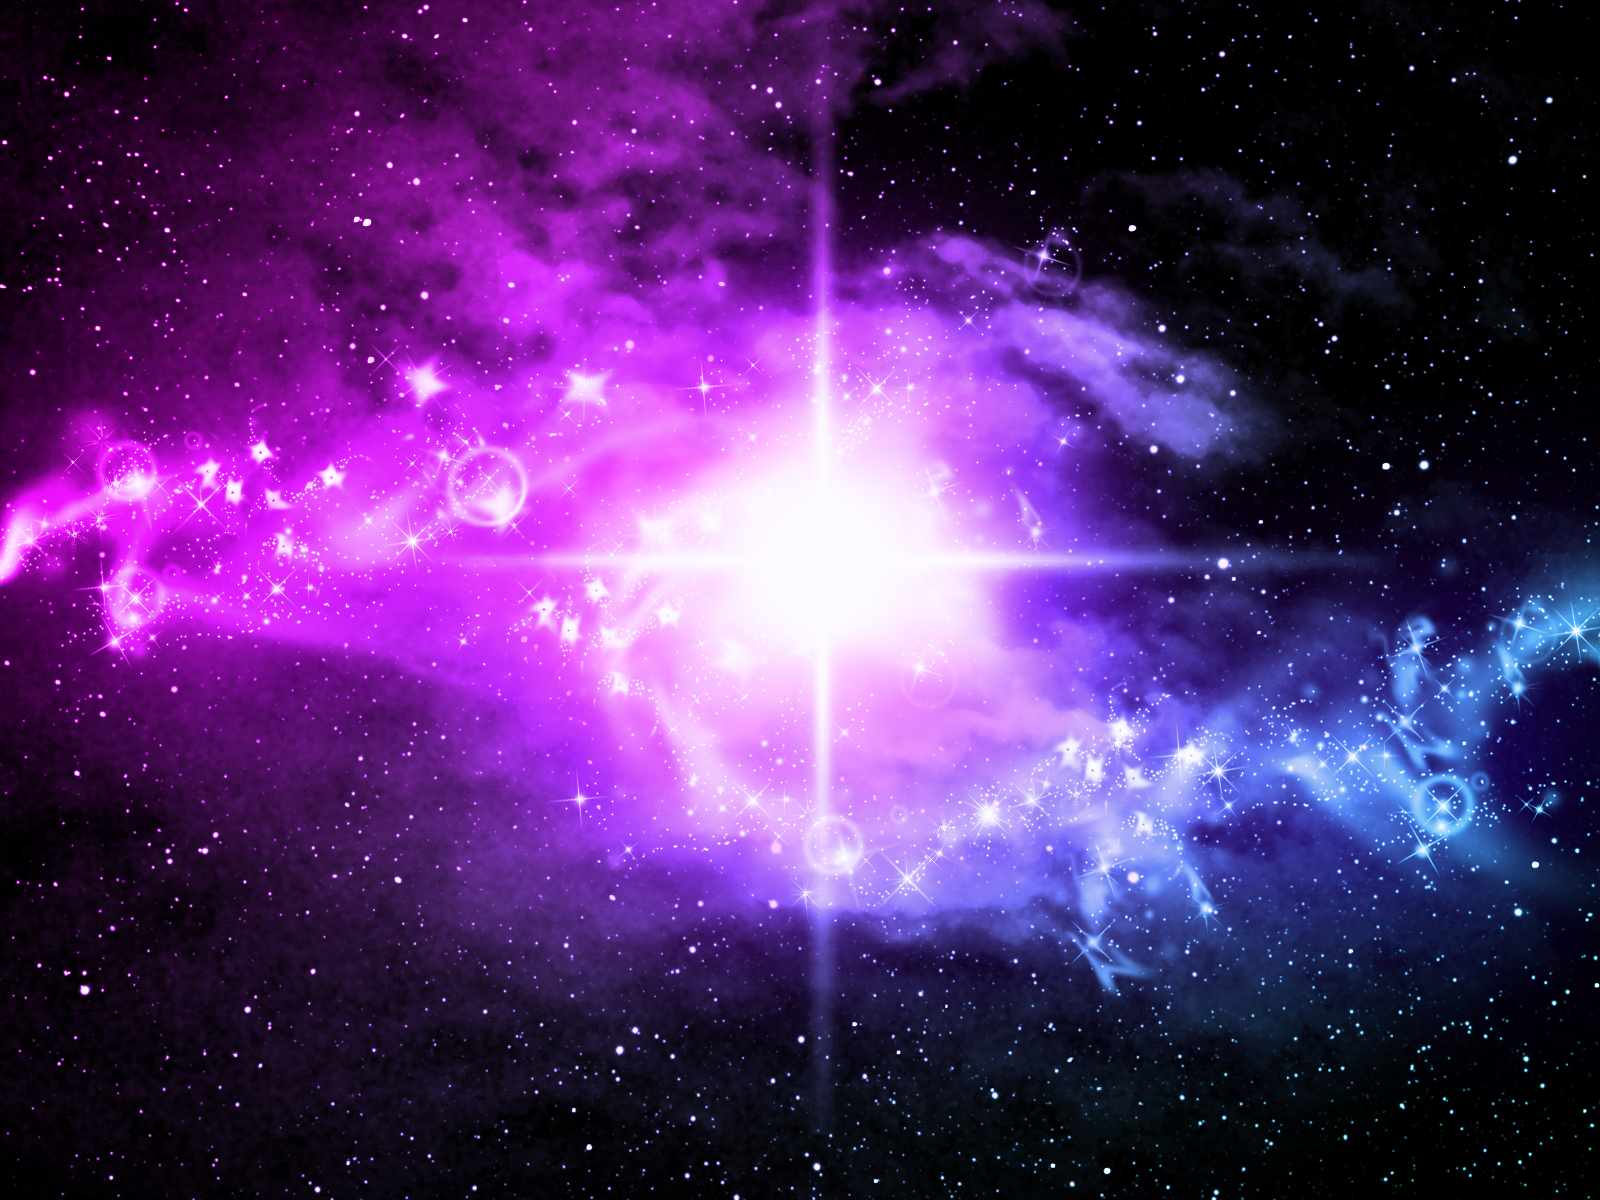 Space painting design powerpoint backgrounds #4019